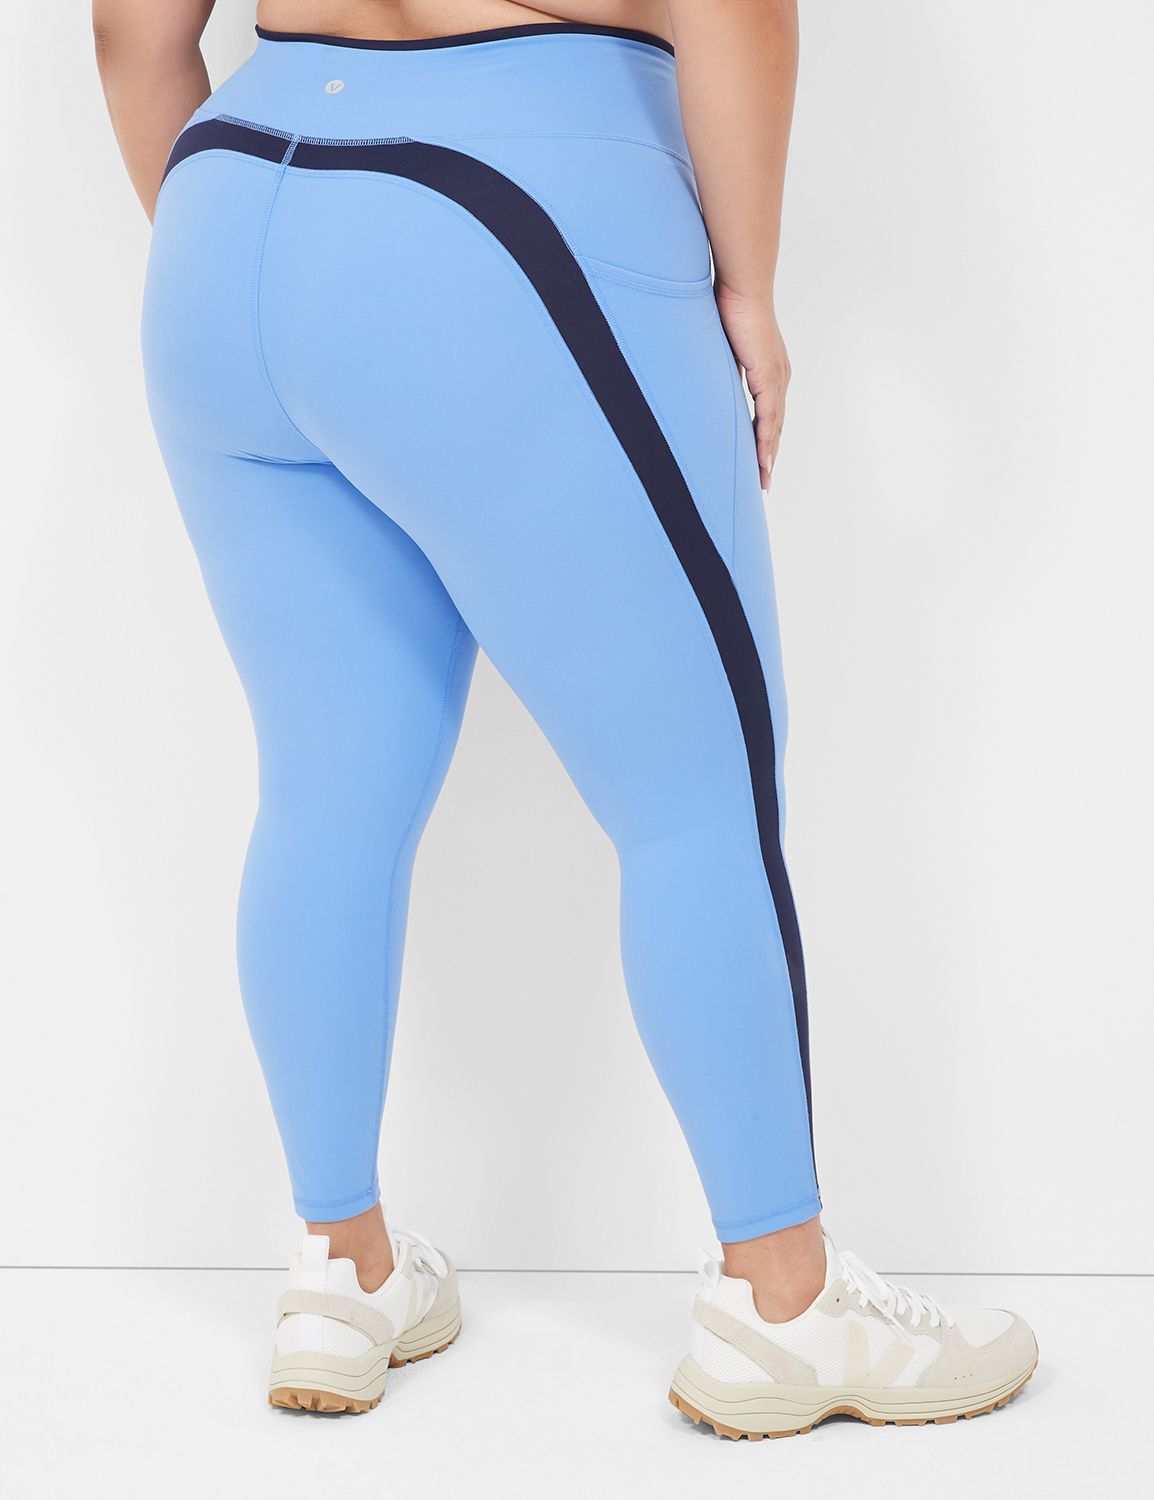 Olivia Mark – Womens Plus Size Fitness Leggings: Solid High-Rise